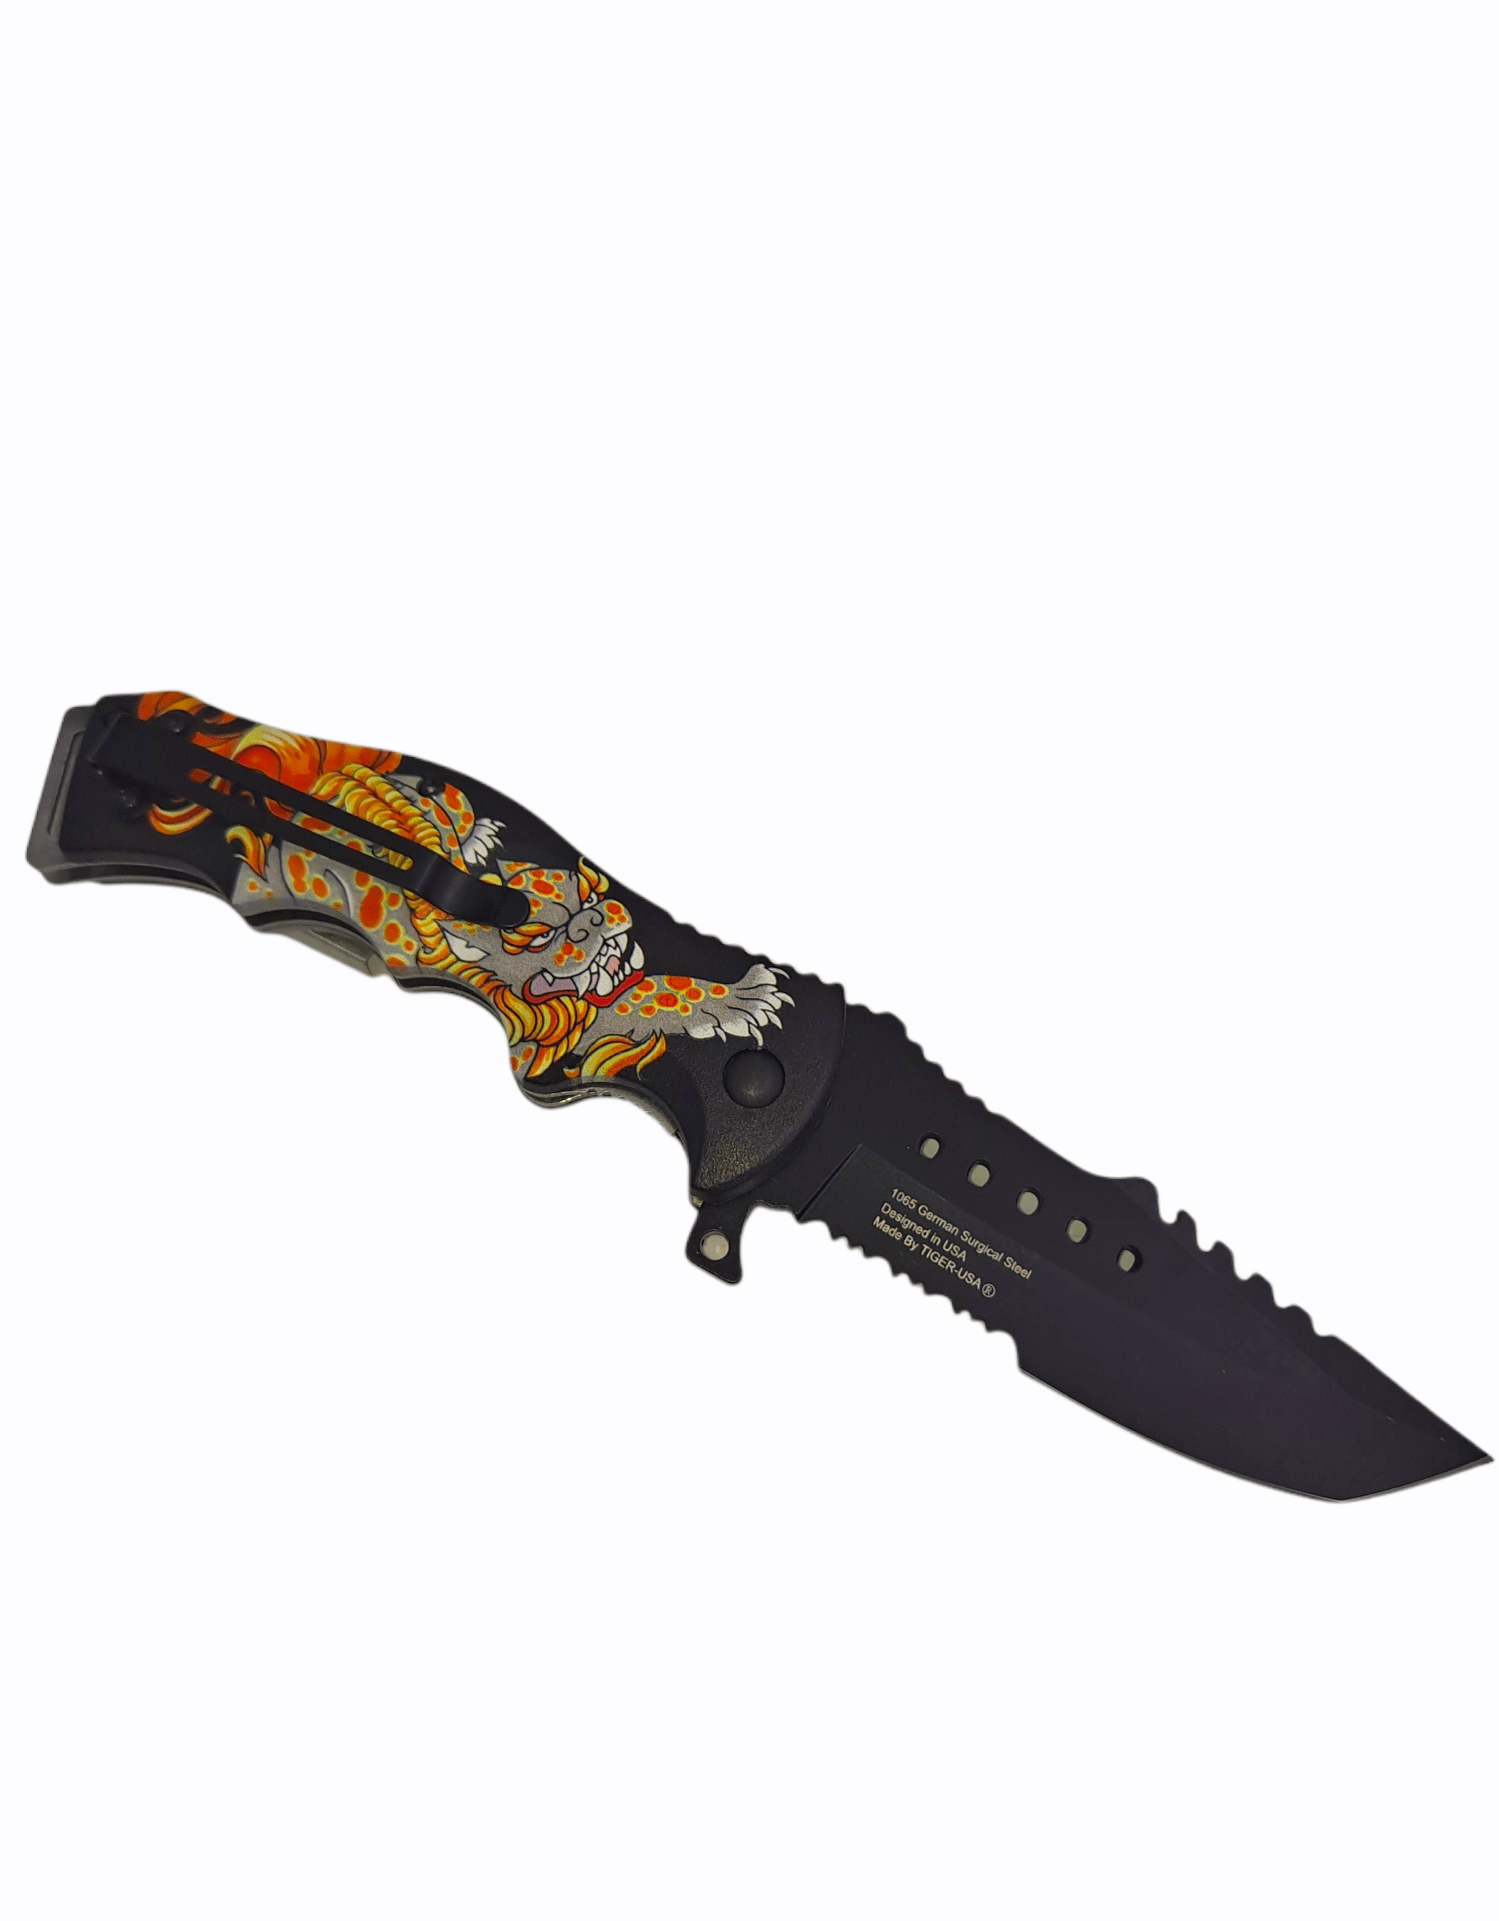 Down Dragon Knife - Blades For Babes - Spring Assisted - 3